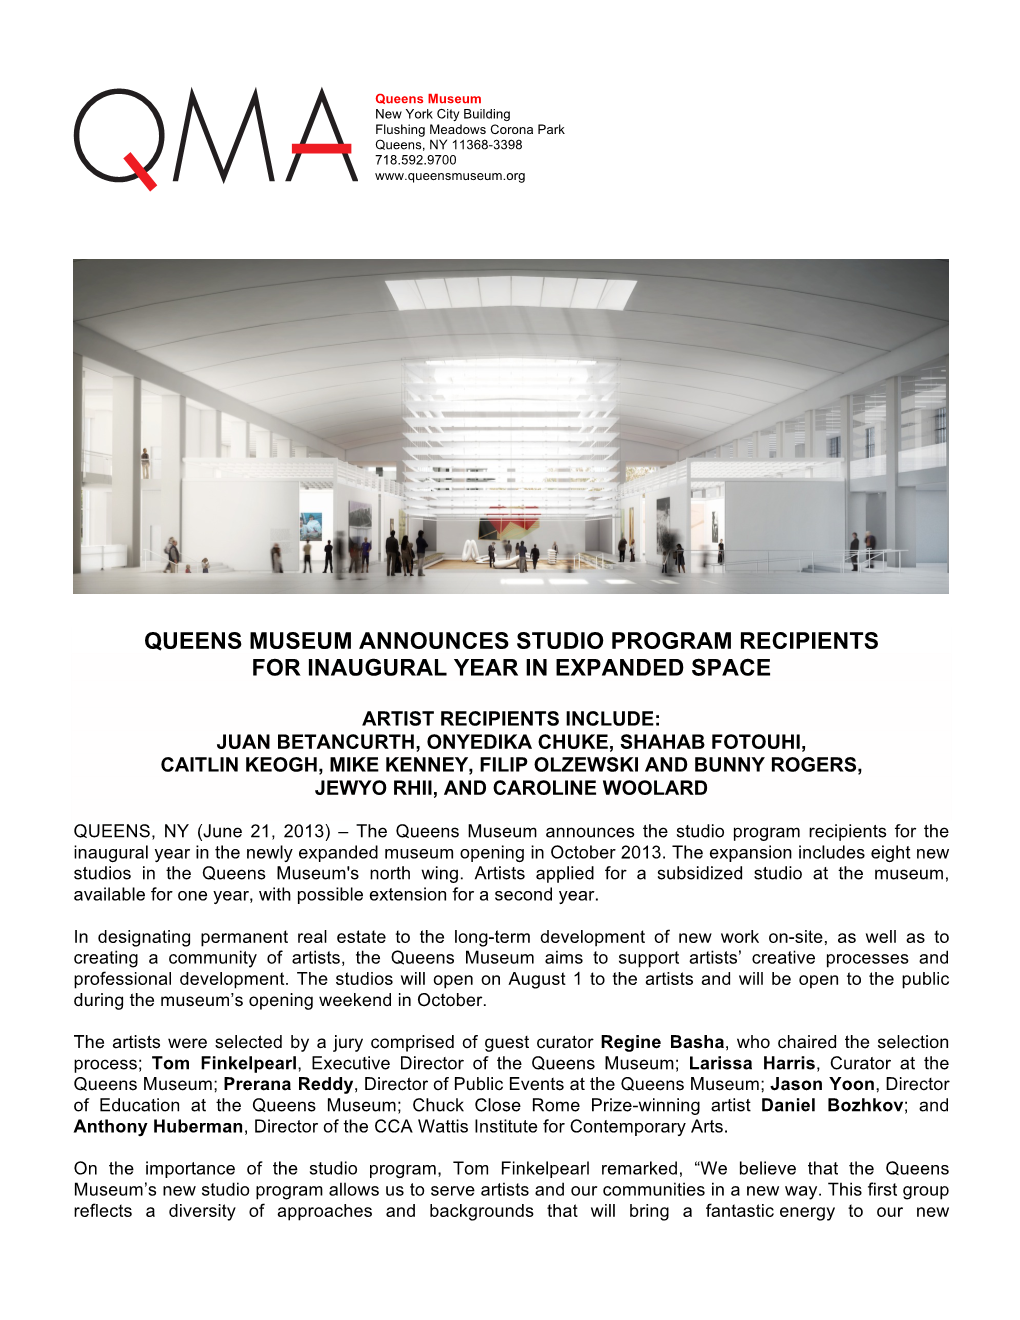 Queens Museum Announces Studio Program Recipients for Inaugural Year in Expanded Space